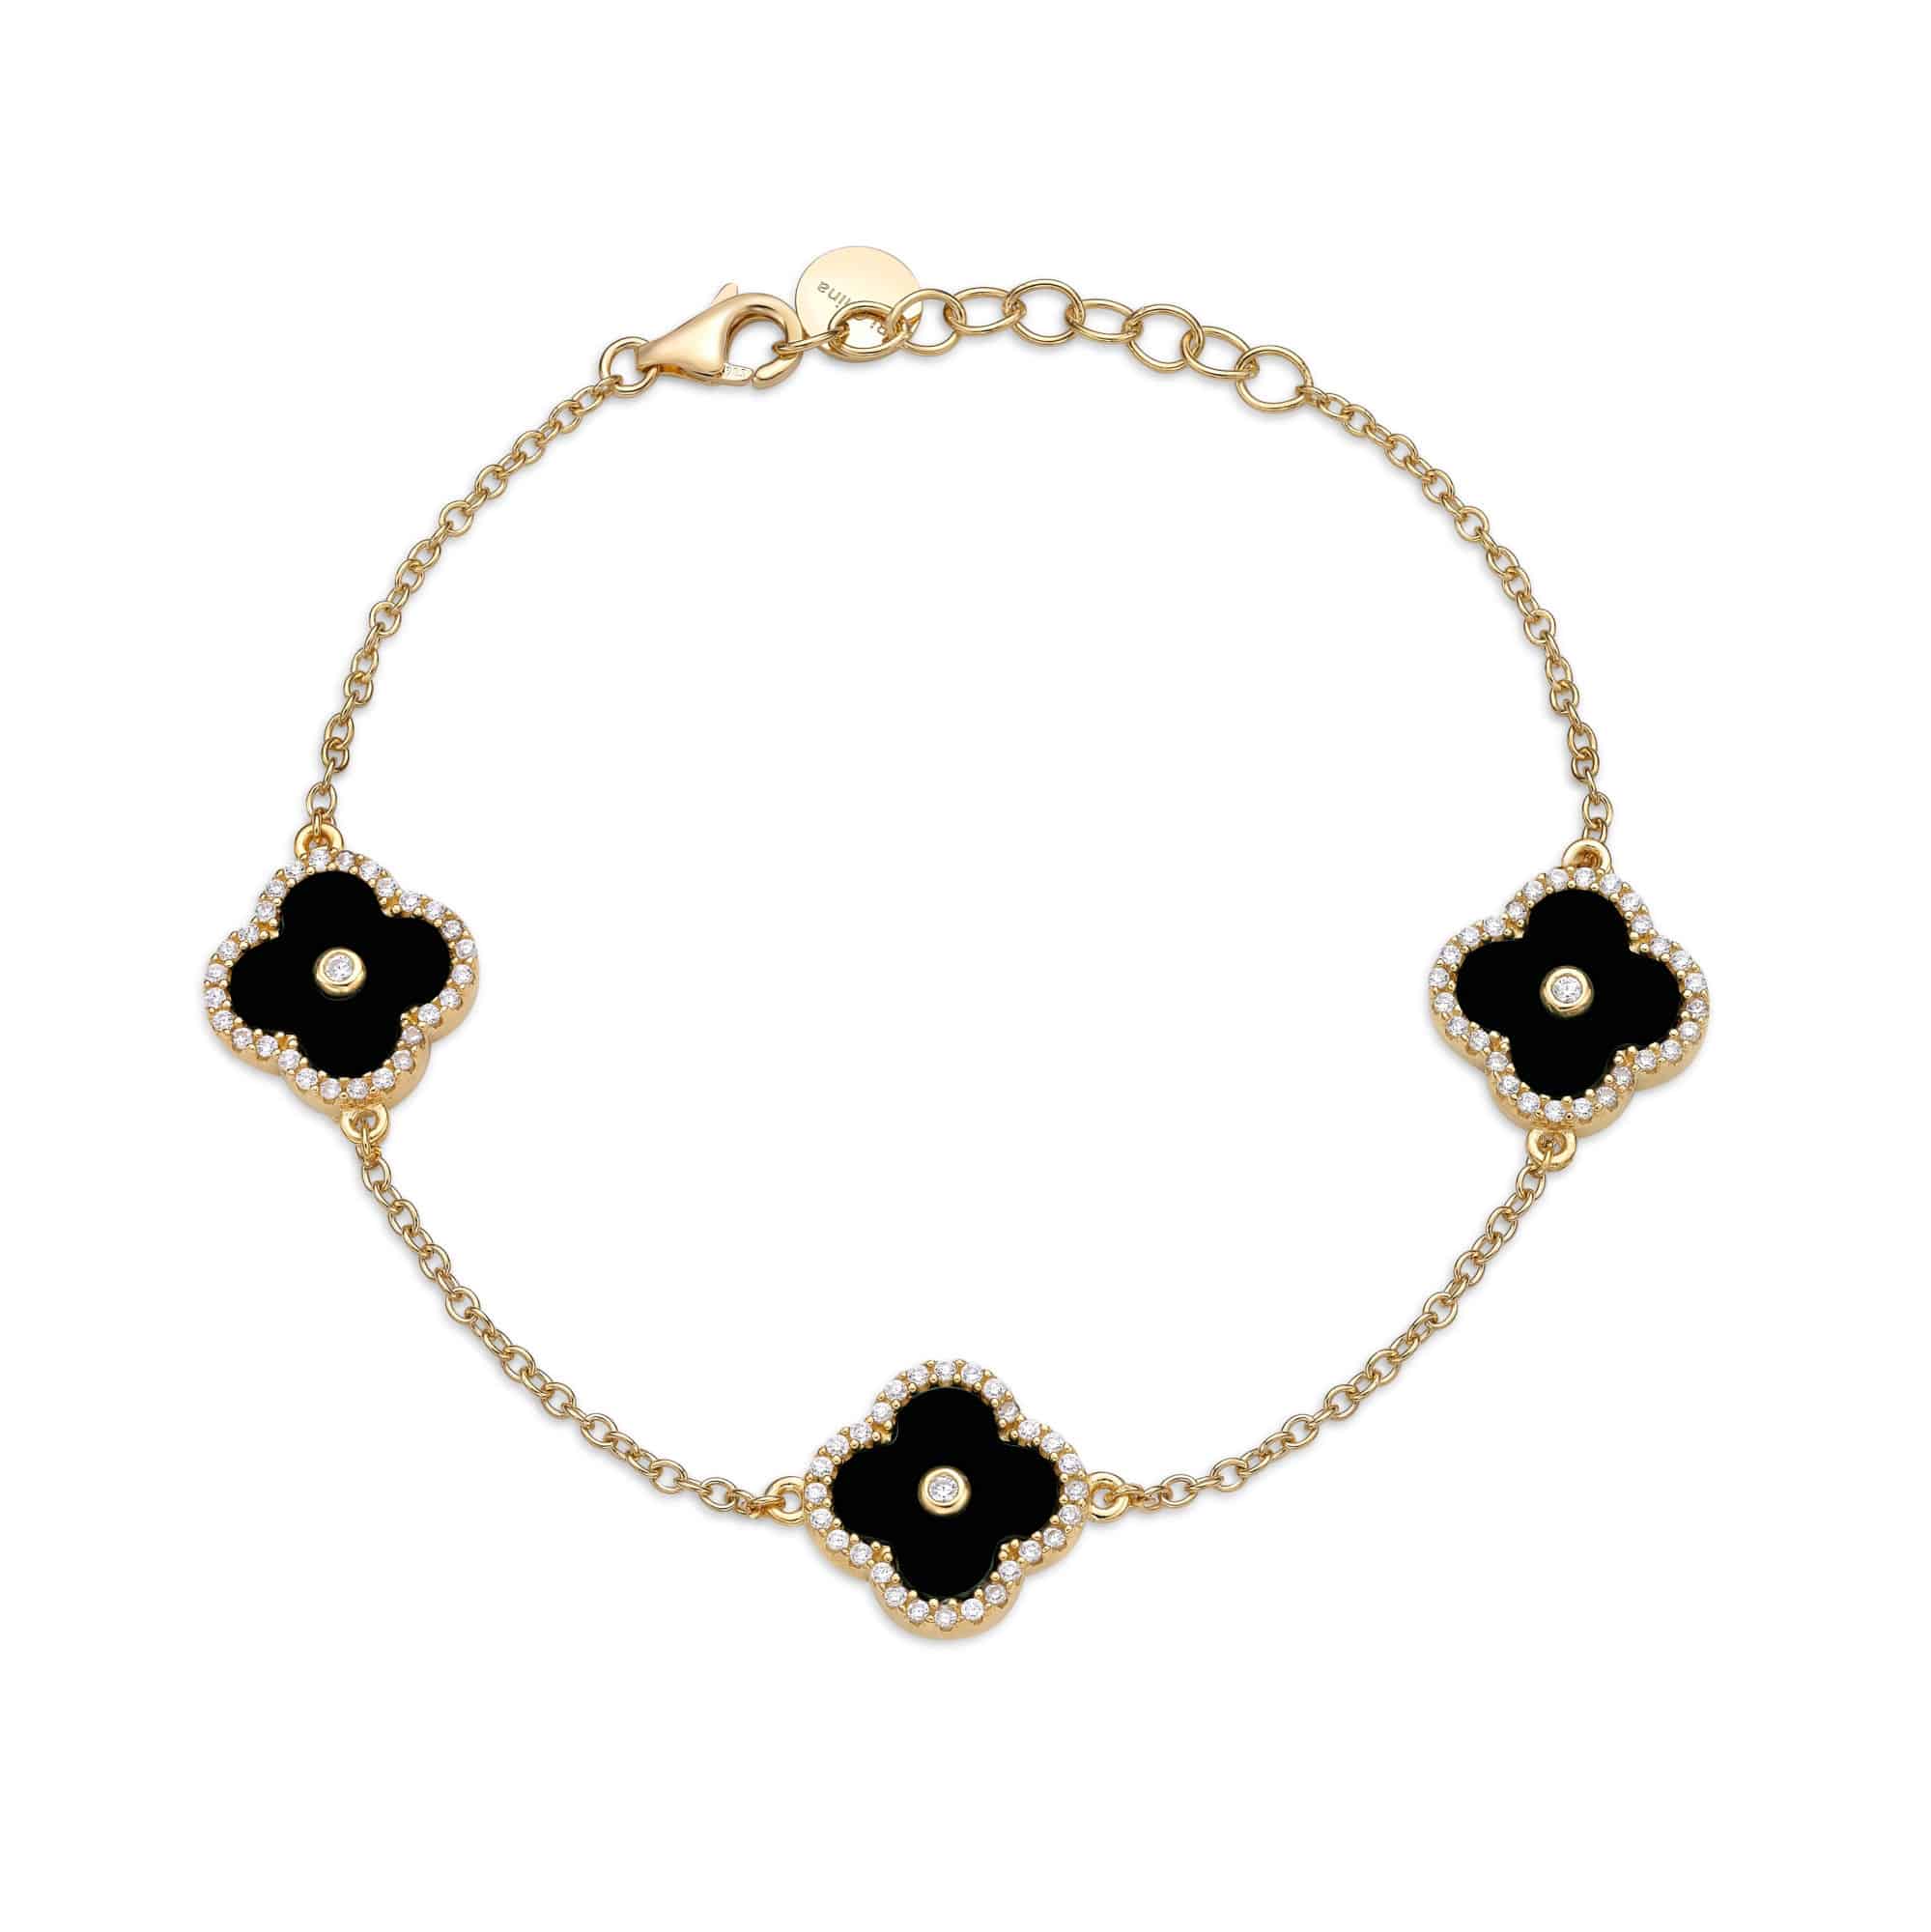 Women's Black Onyx Three-Station Flower Bracelet in Yellow Gold Plated Sterling Silver with Cubic Zirconia Halo - 7-8 Inch Adjustable Cable Chain - Flora | Lavari Jewelers